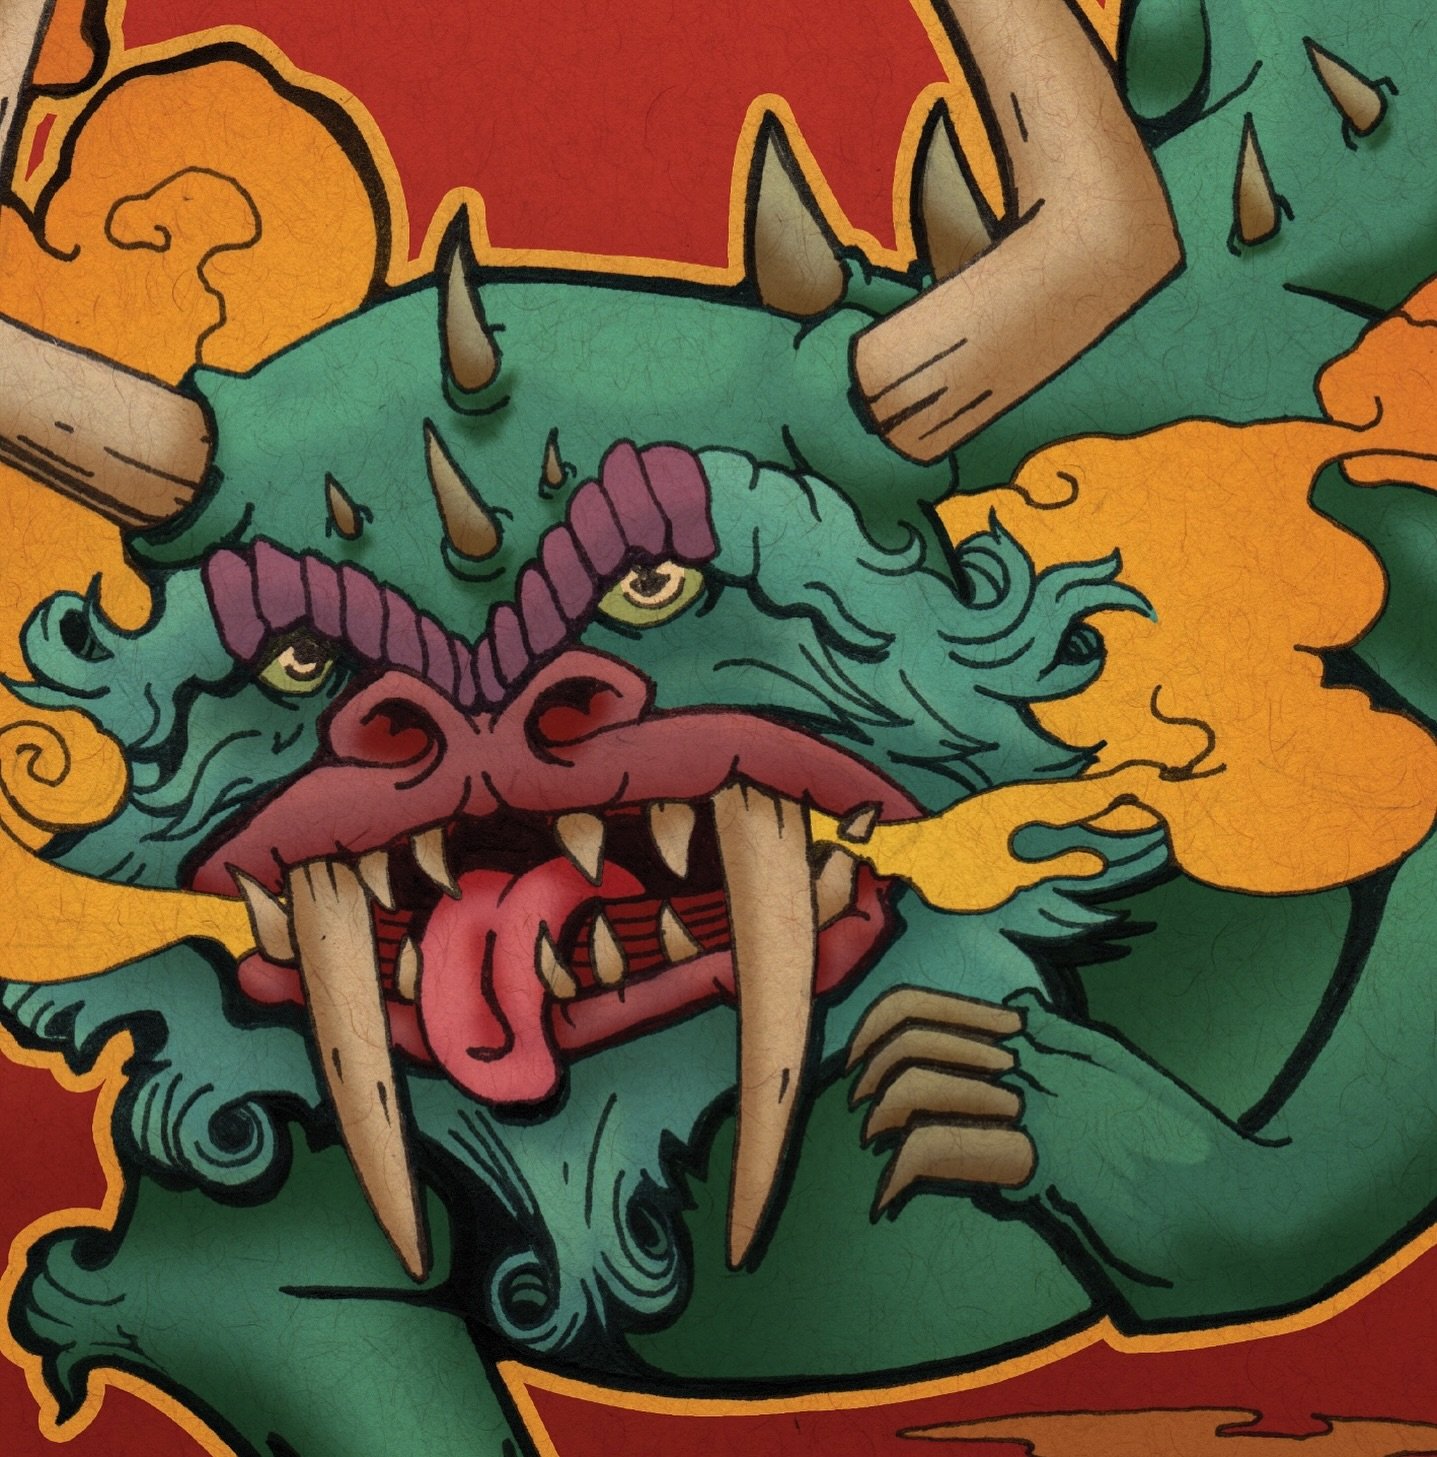 Who&rsquo;s ready for the new Brimstone Studios 2024 Hodag #Print?! See the full reveal tomorrow, just in time for Hodag Heritage Festival in Rhinelander this weekend!

@rhinelanderchamber #cryptid #monster #northwoods #creature #folklore #mythology 